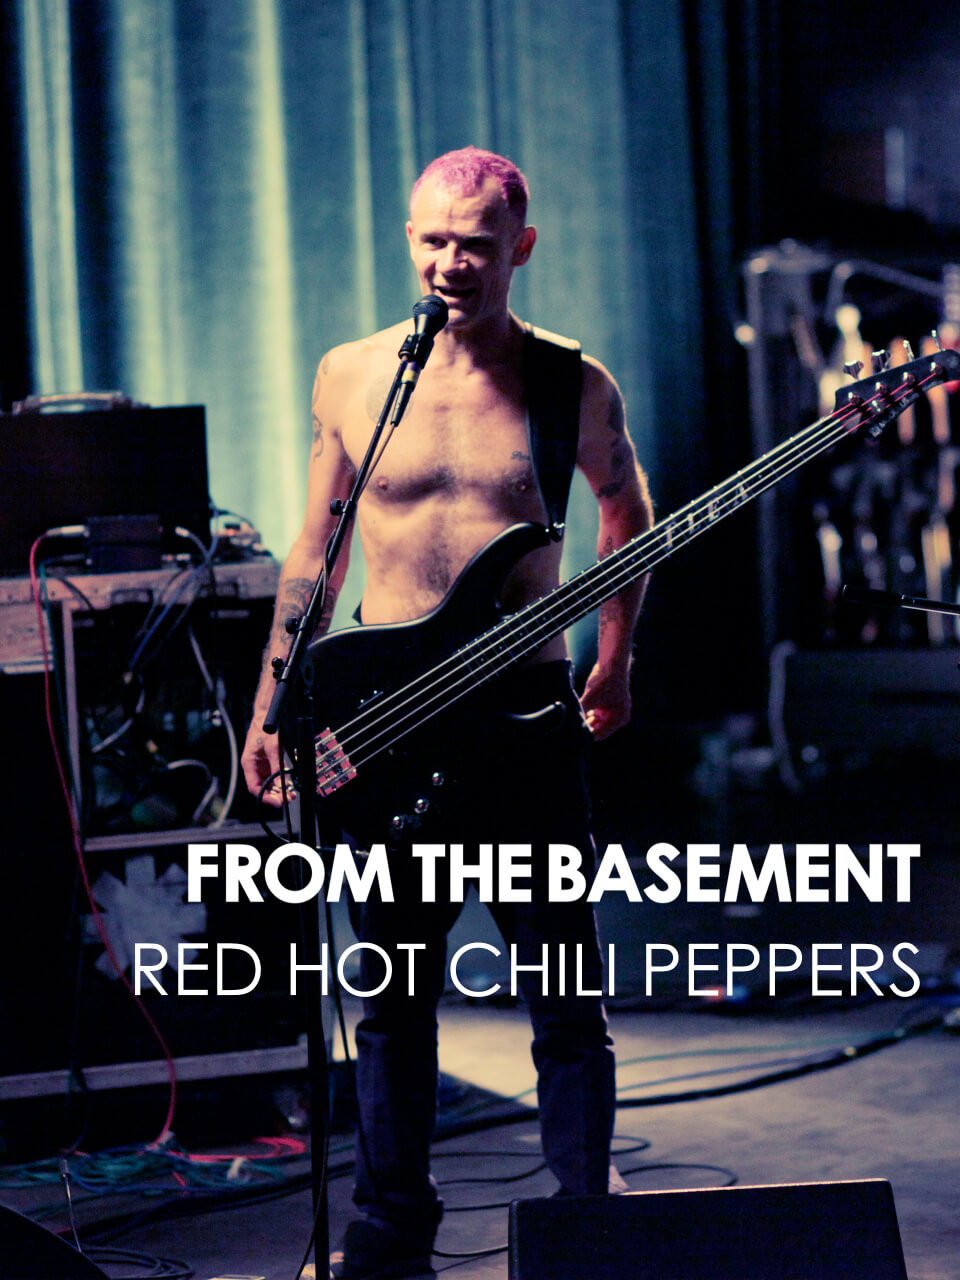 From the Basement - Red Hot Chili Peppers